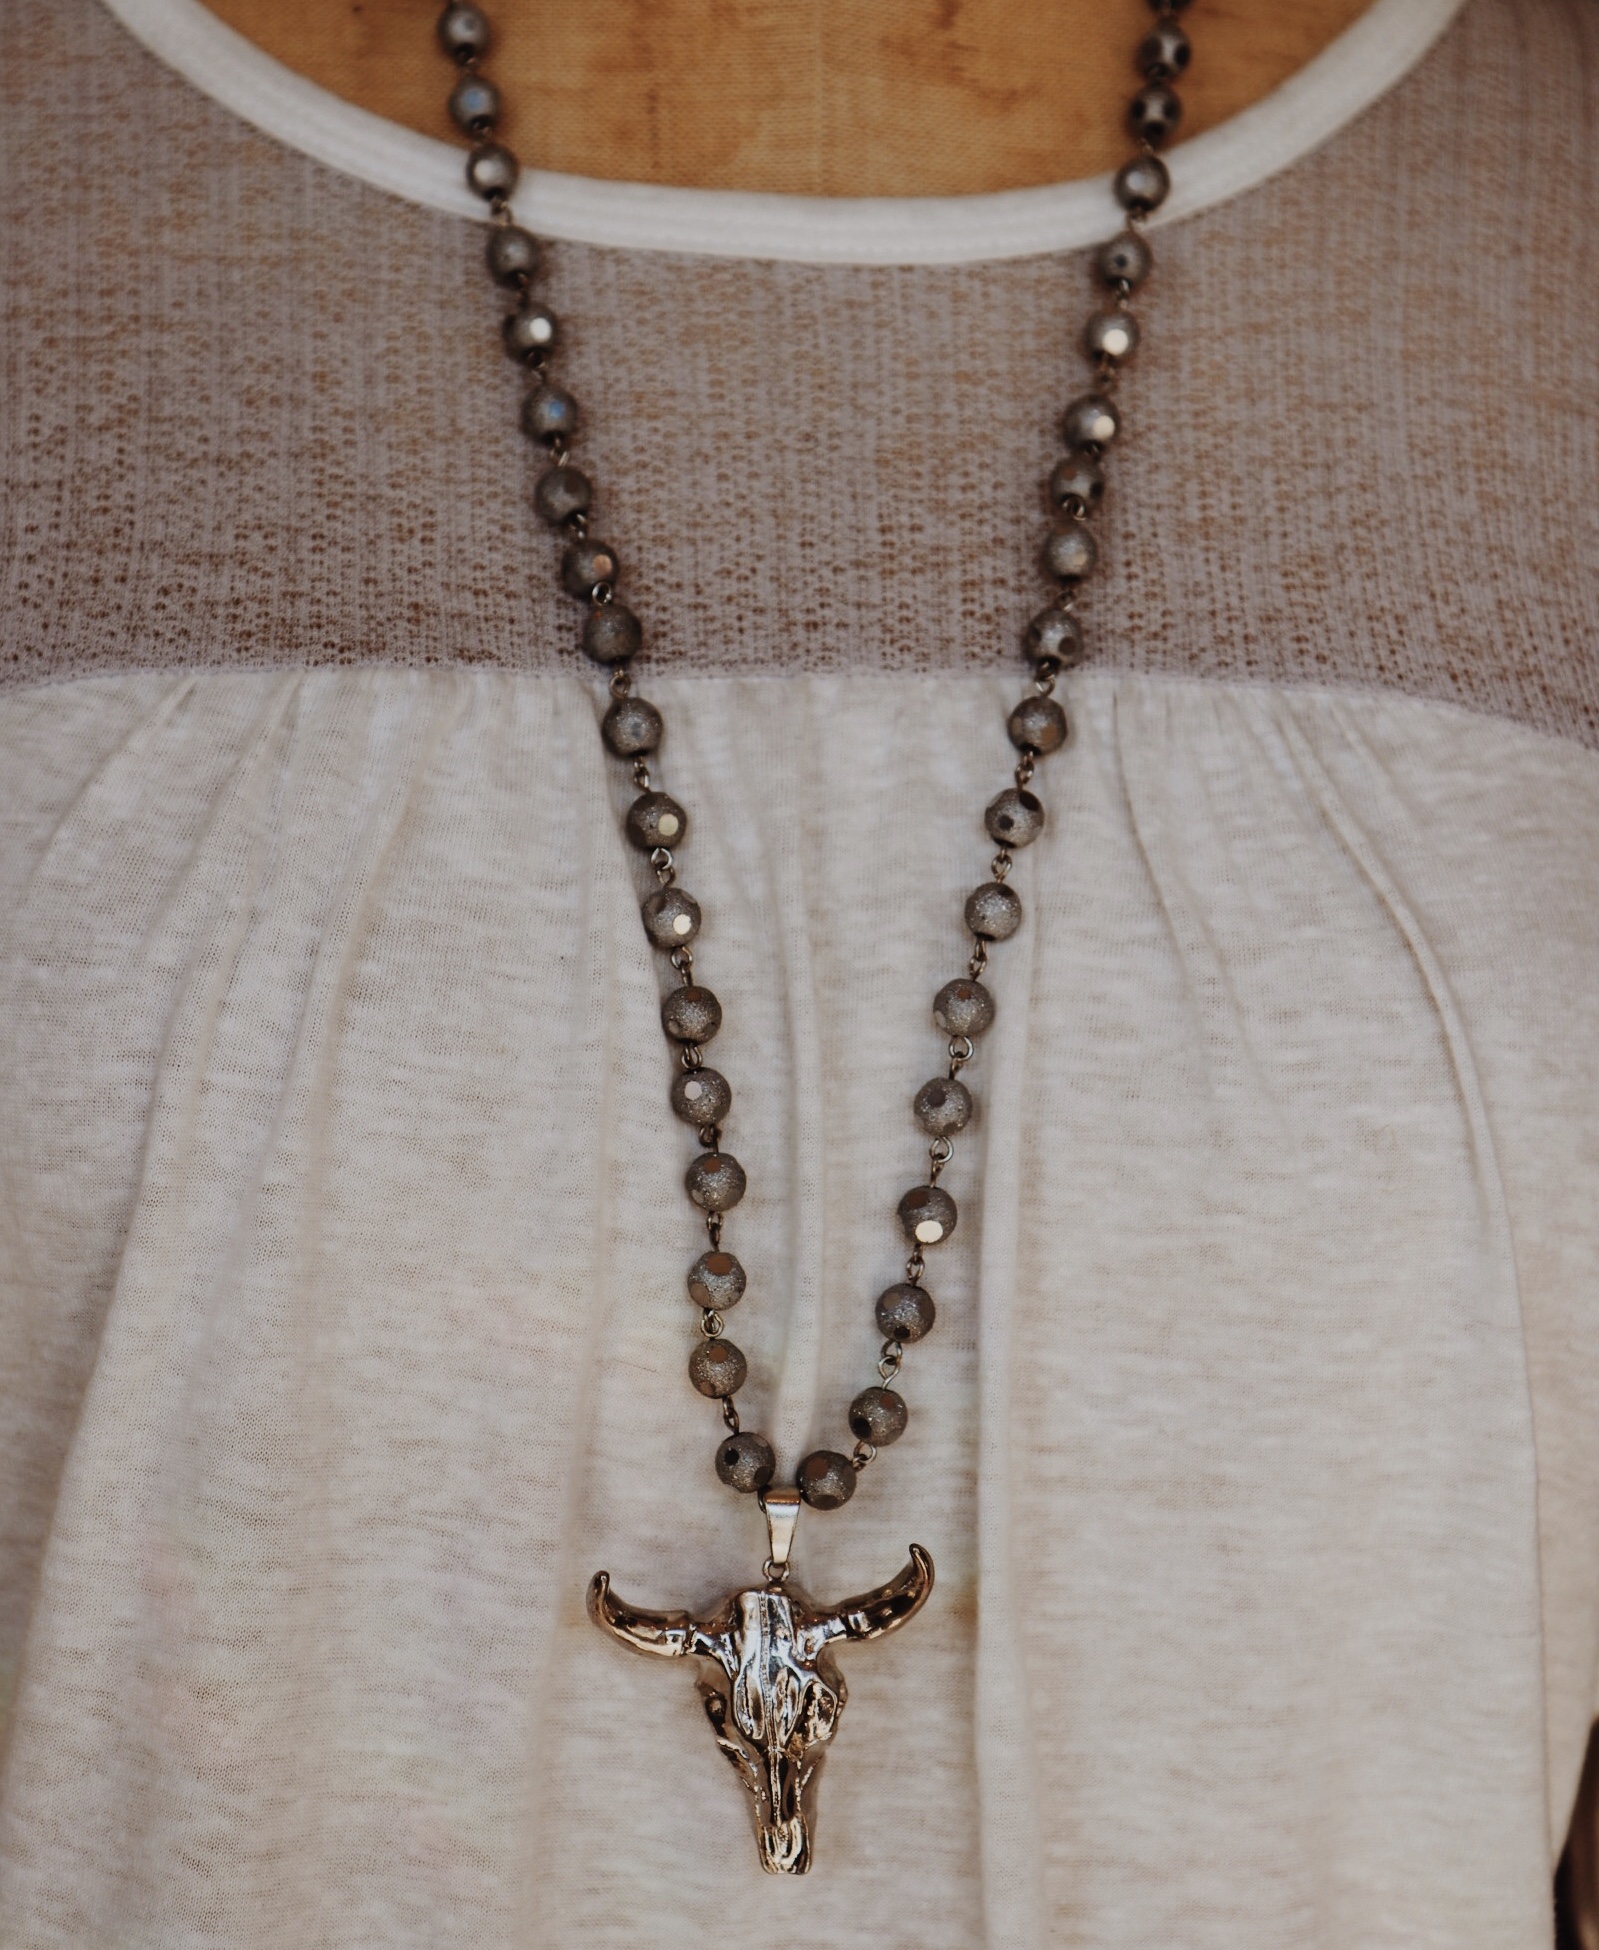 Boho Silver Beaded Cow Skull Necklace. 32 inch beaded chain. So cute layered with a choker!